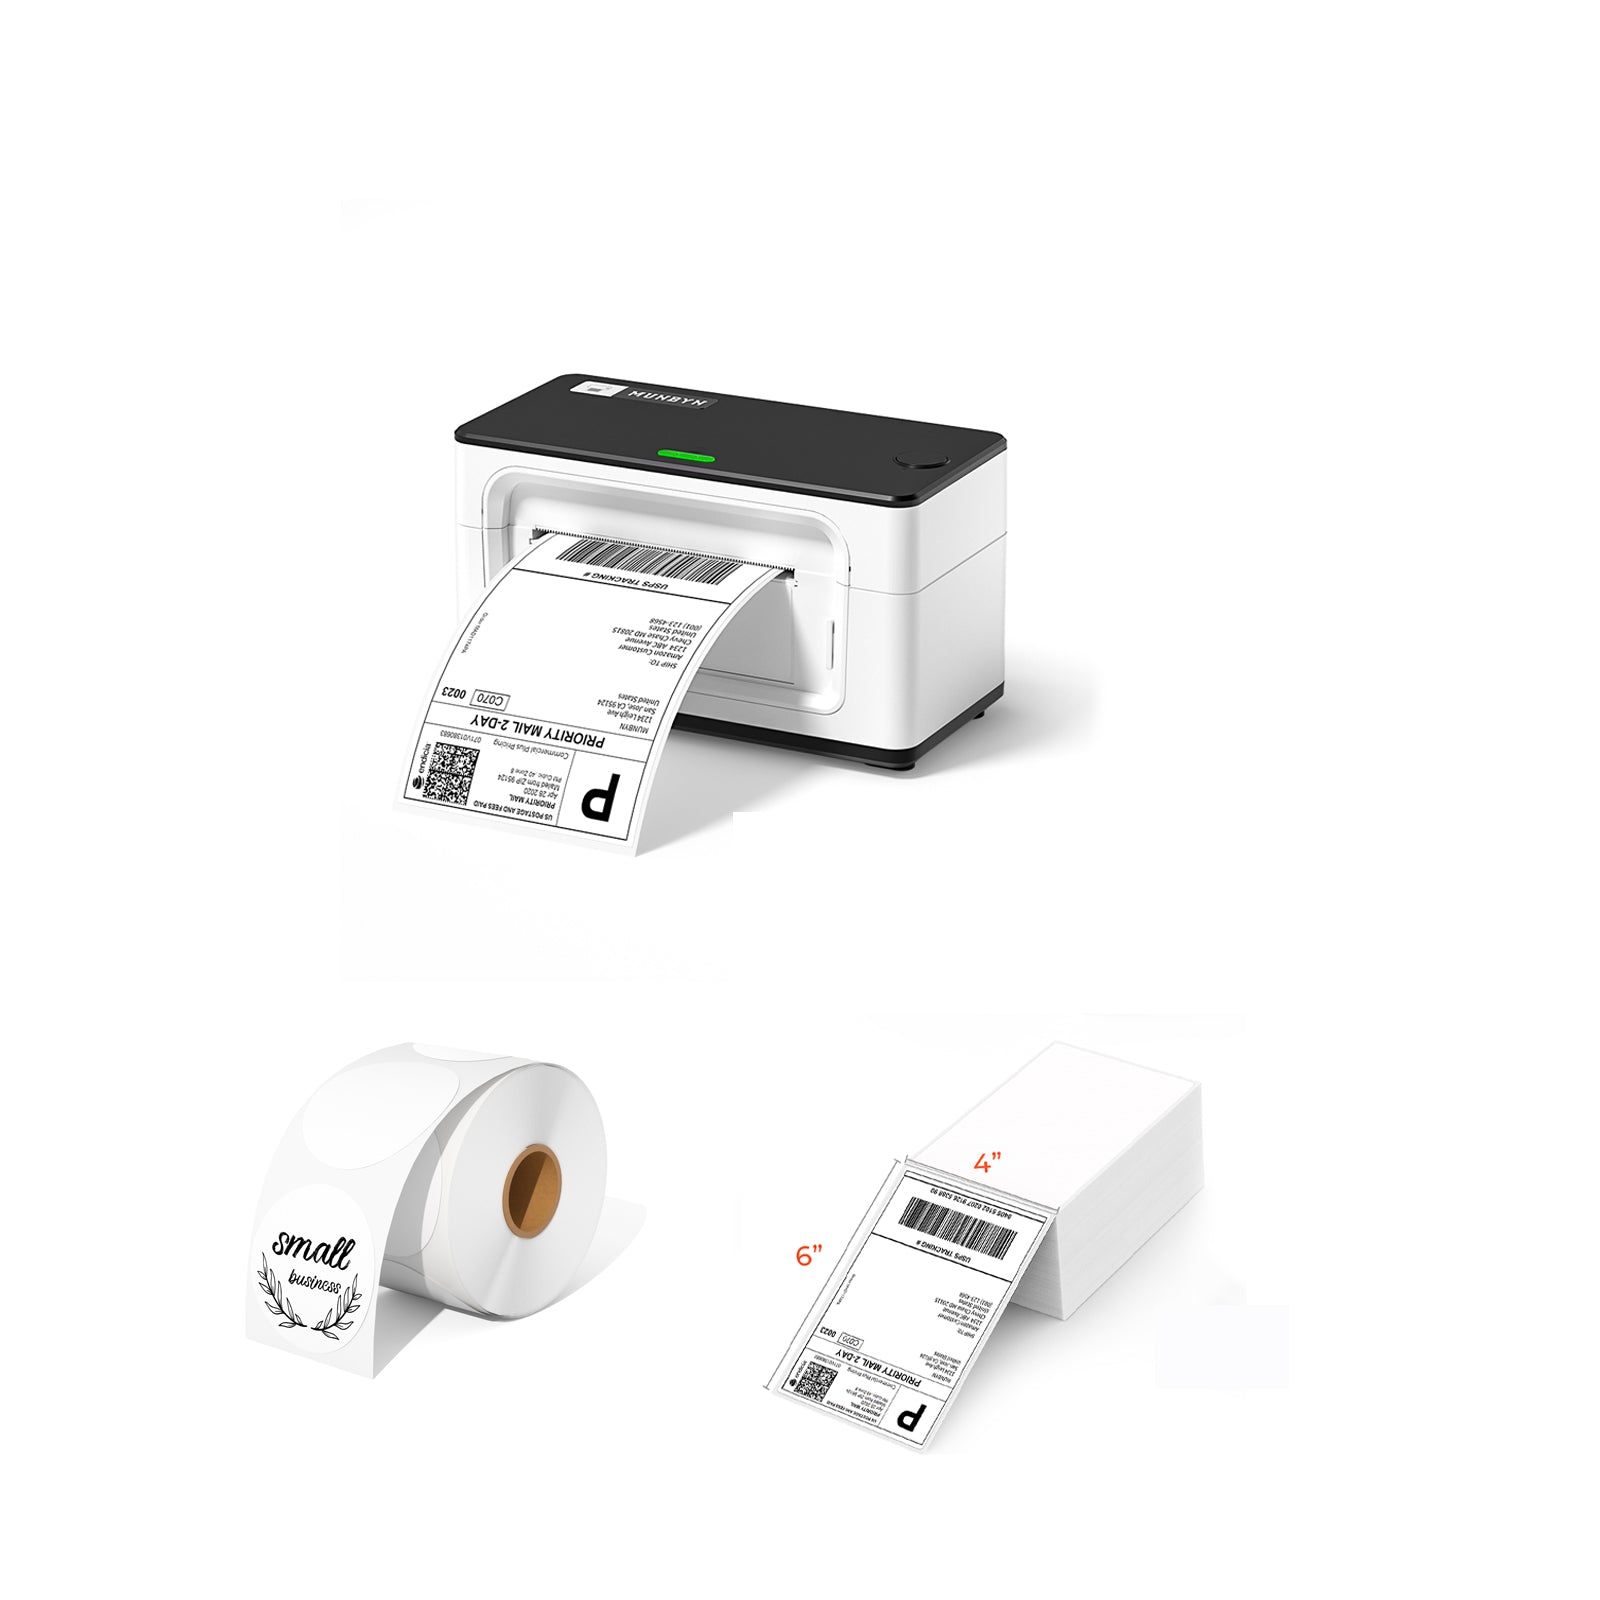 The MUNBYN P941 Pro cheap printer kit includes a thermal printer, a roll of blank circle labels and a stack of shipping labels.